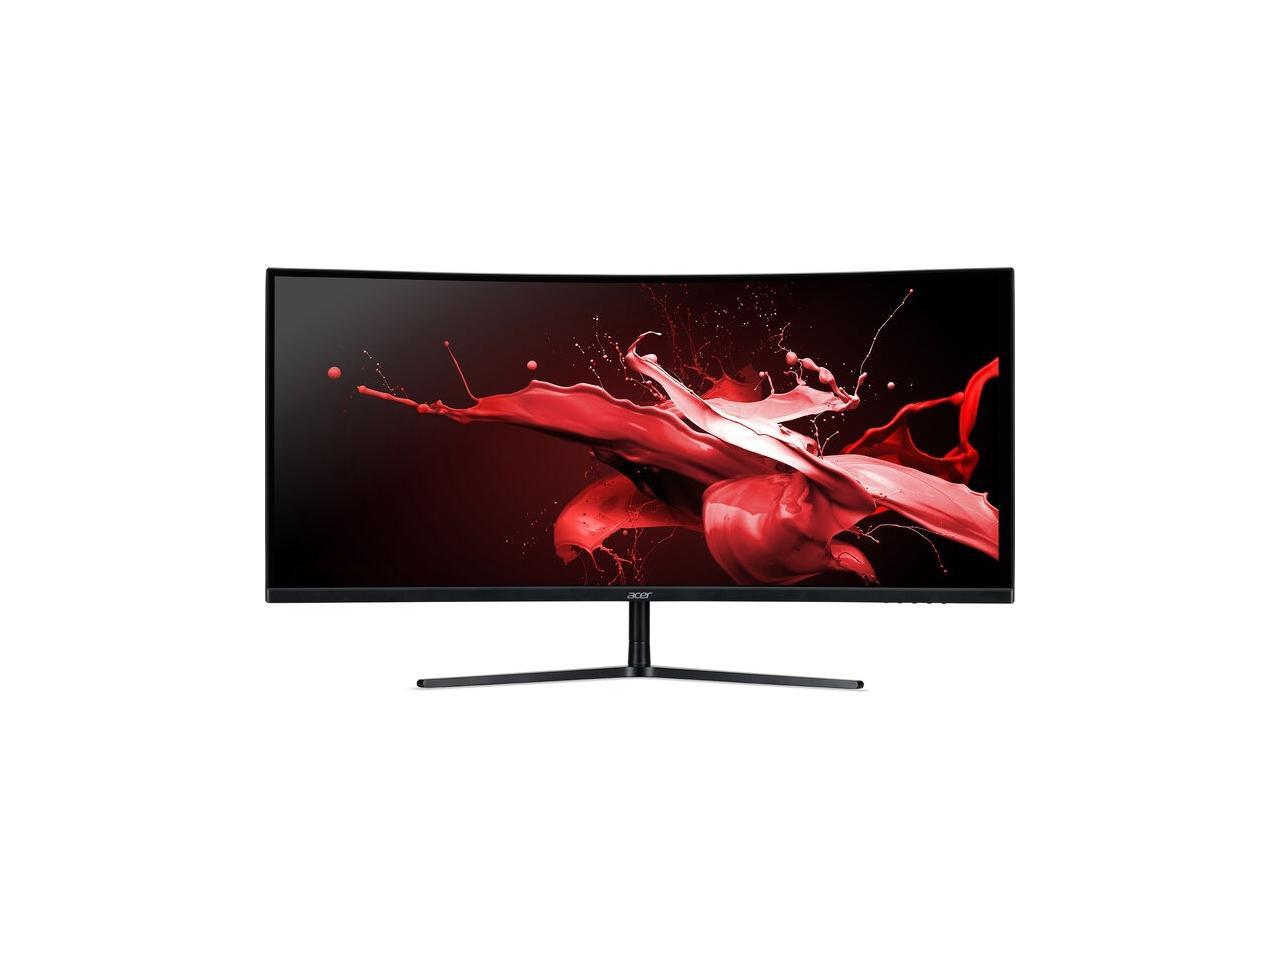 Acer 34" QHD FreeSync Curved Gaming Monitor (144Hz, VA, 1ms) $399.99 at Costco